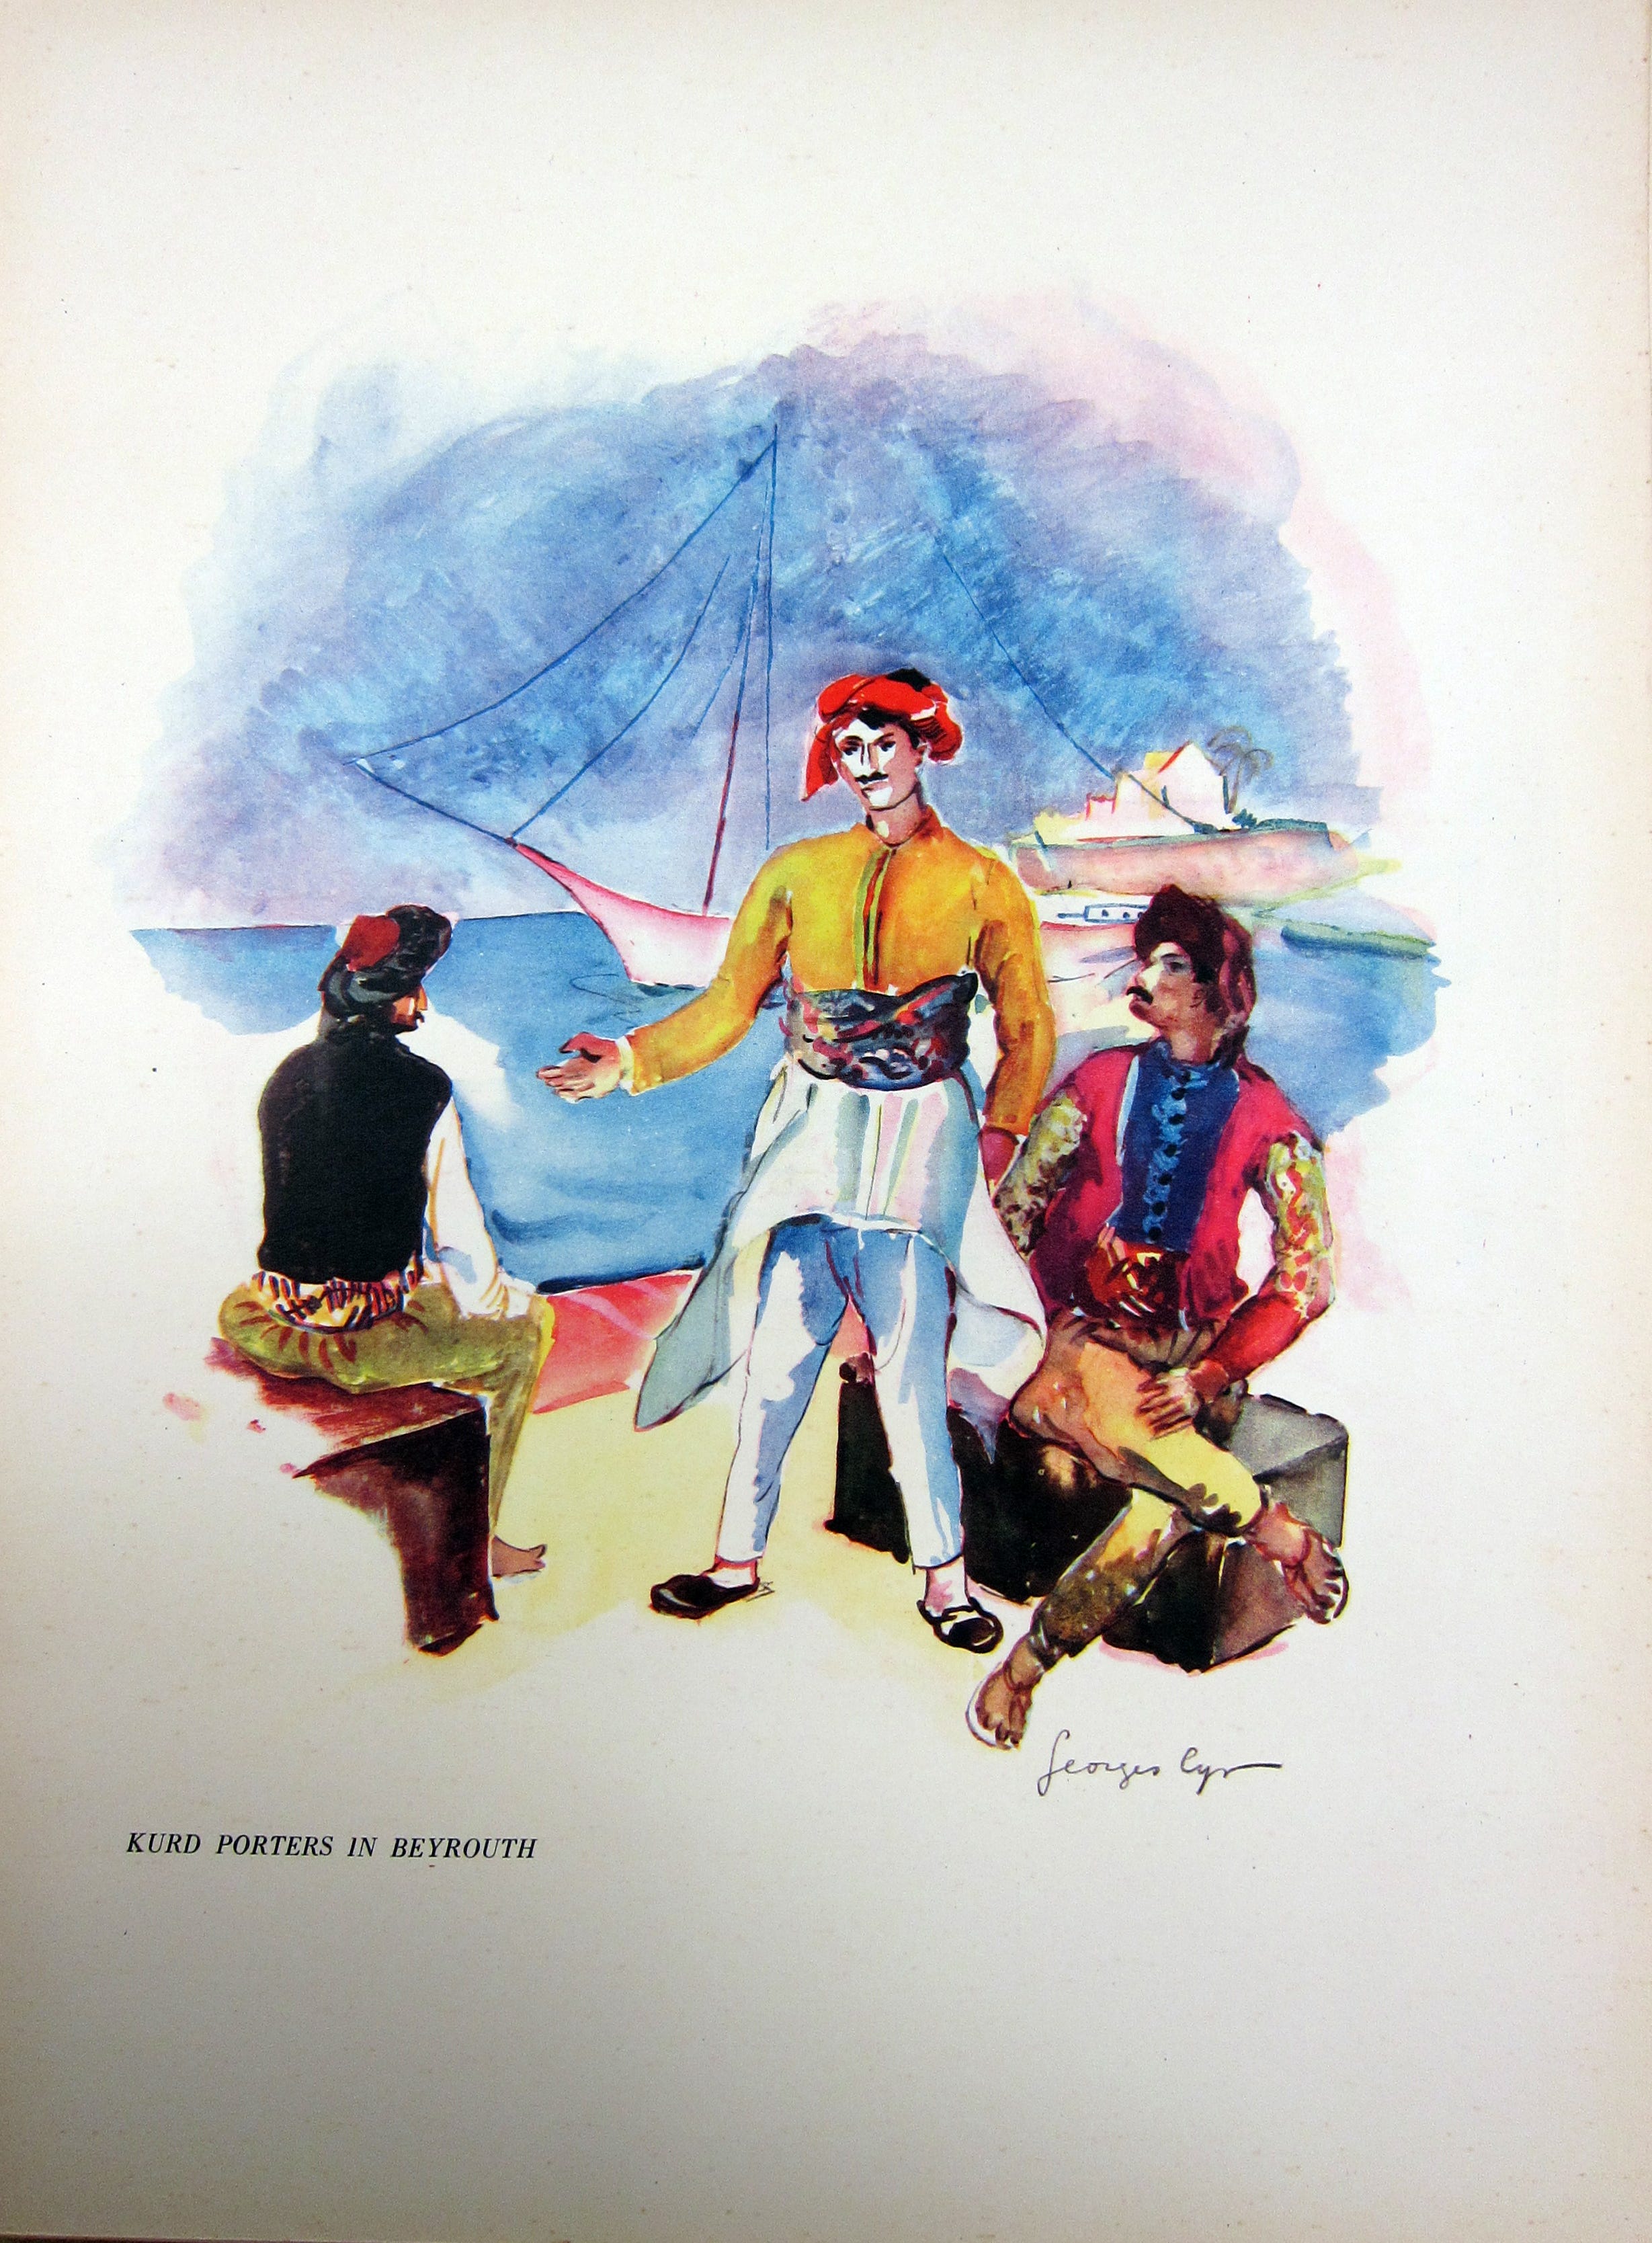 Georges Cyr's Lebanese and Syrian Costumes,